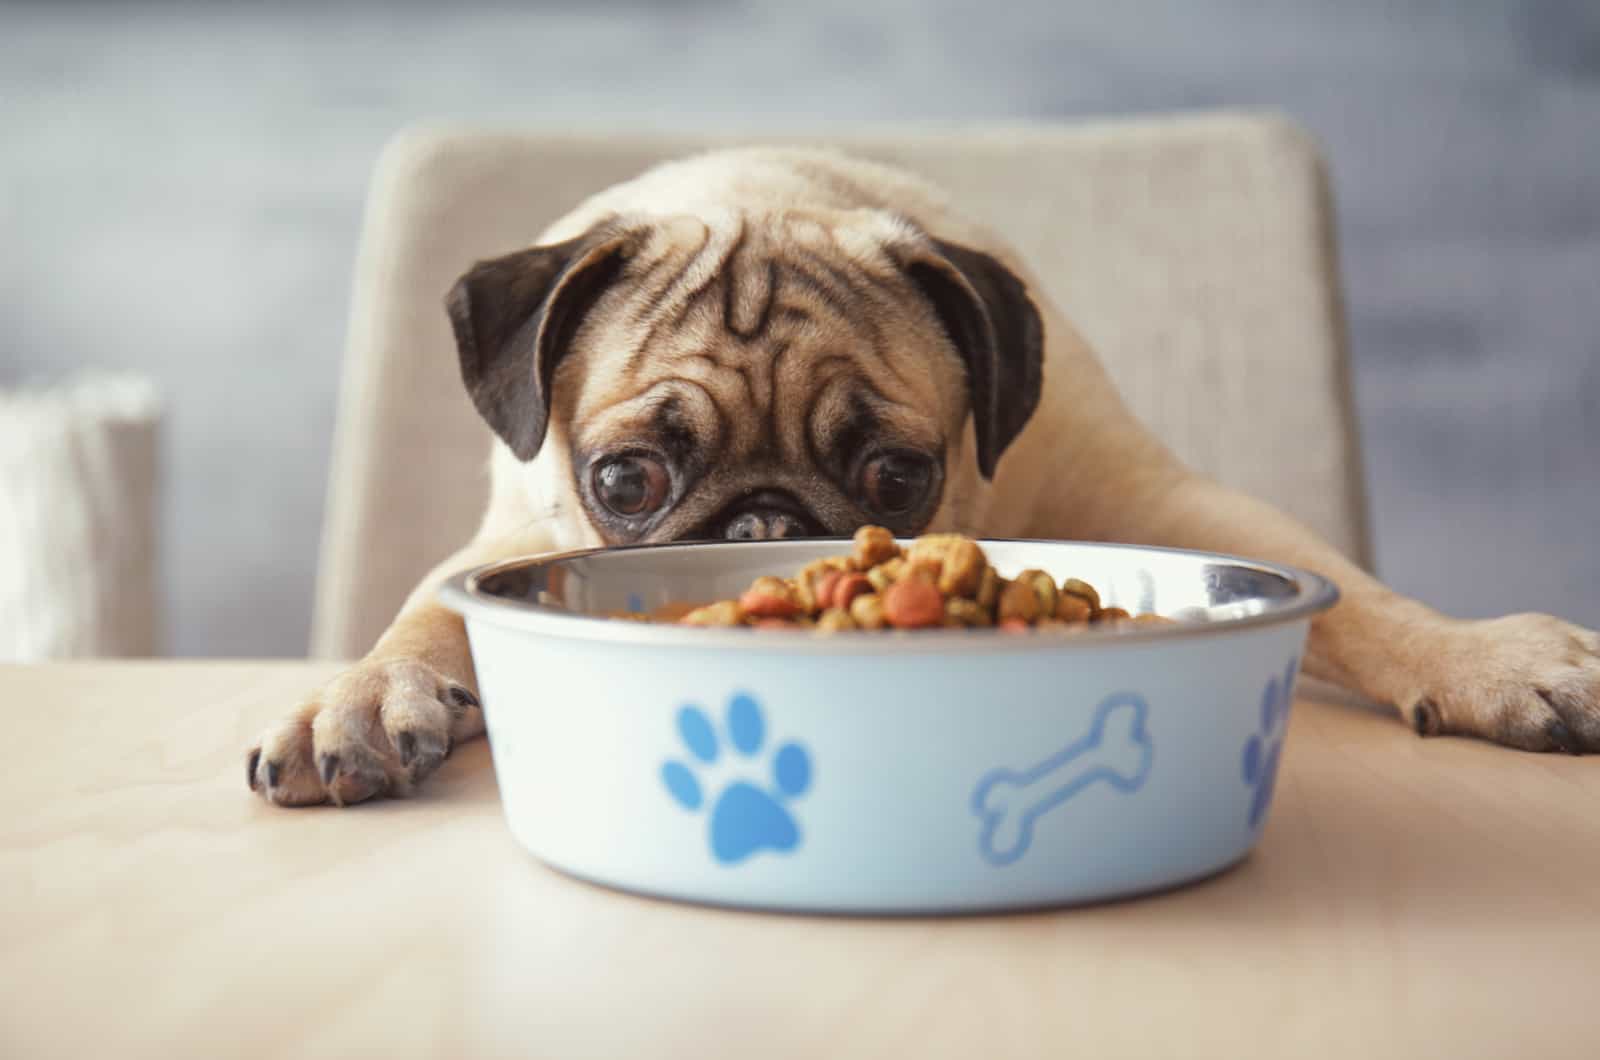 hungry dog looks at his bowl with food